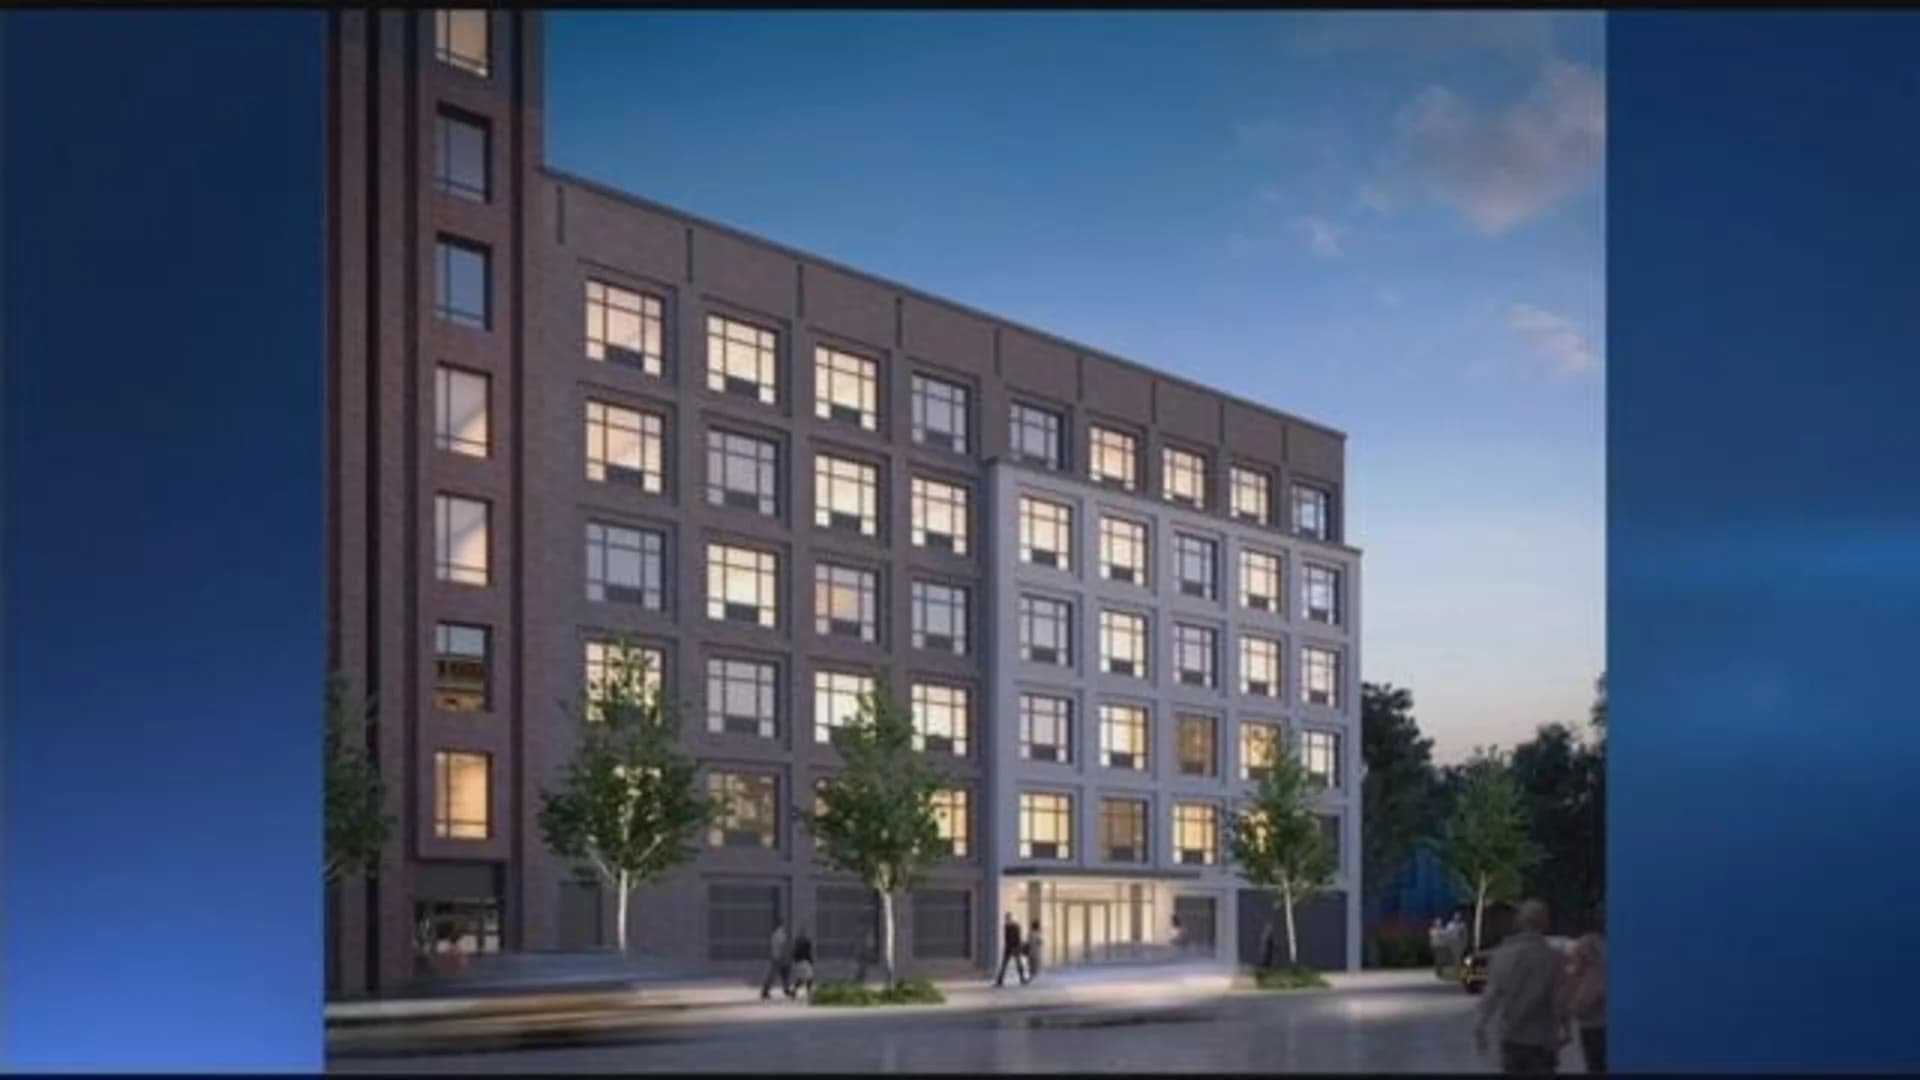 Affordable housing construction begins in East New York